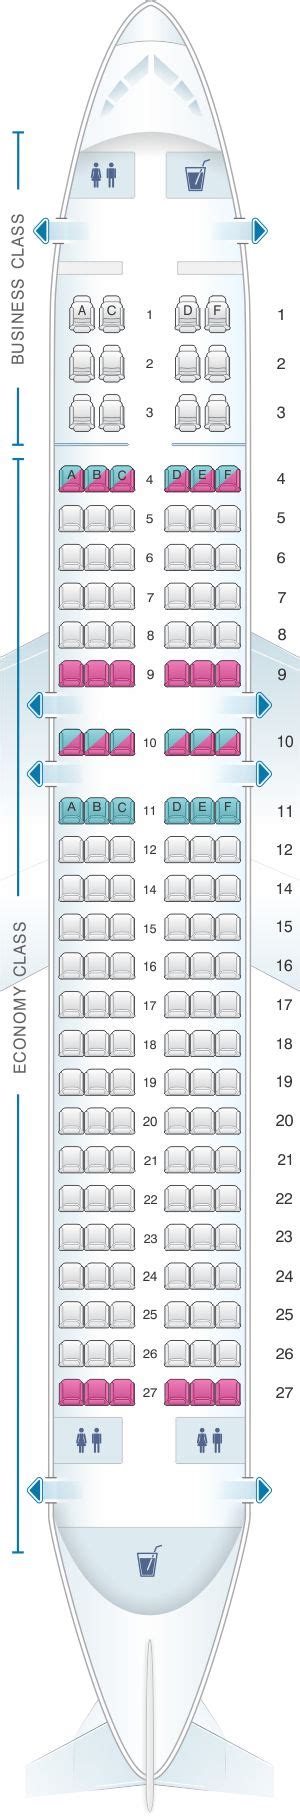 Seat Map Avianca Airbus A320 Air Transat Asiana Airlines Seating Charts